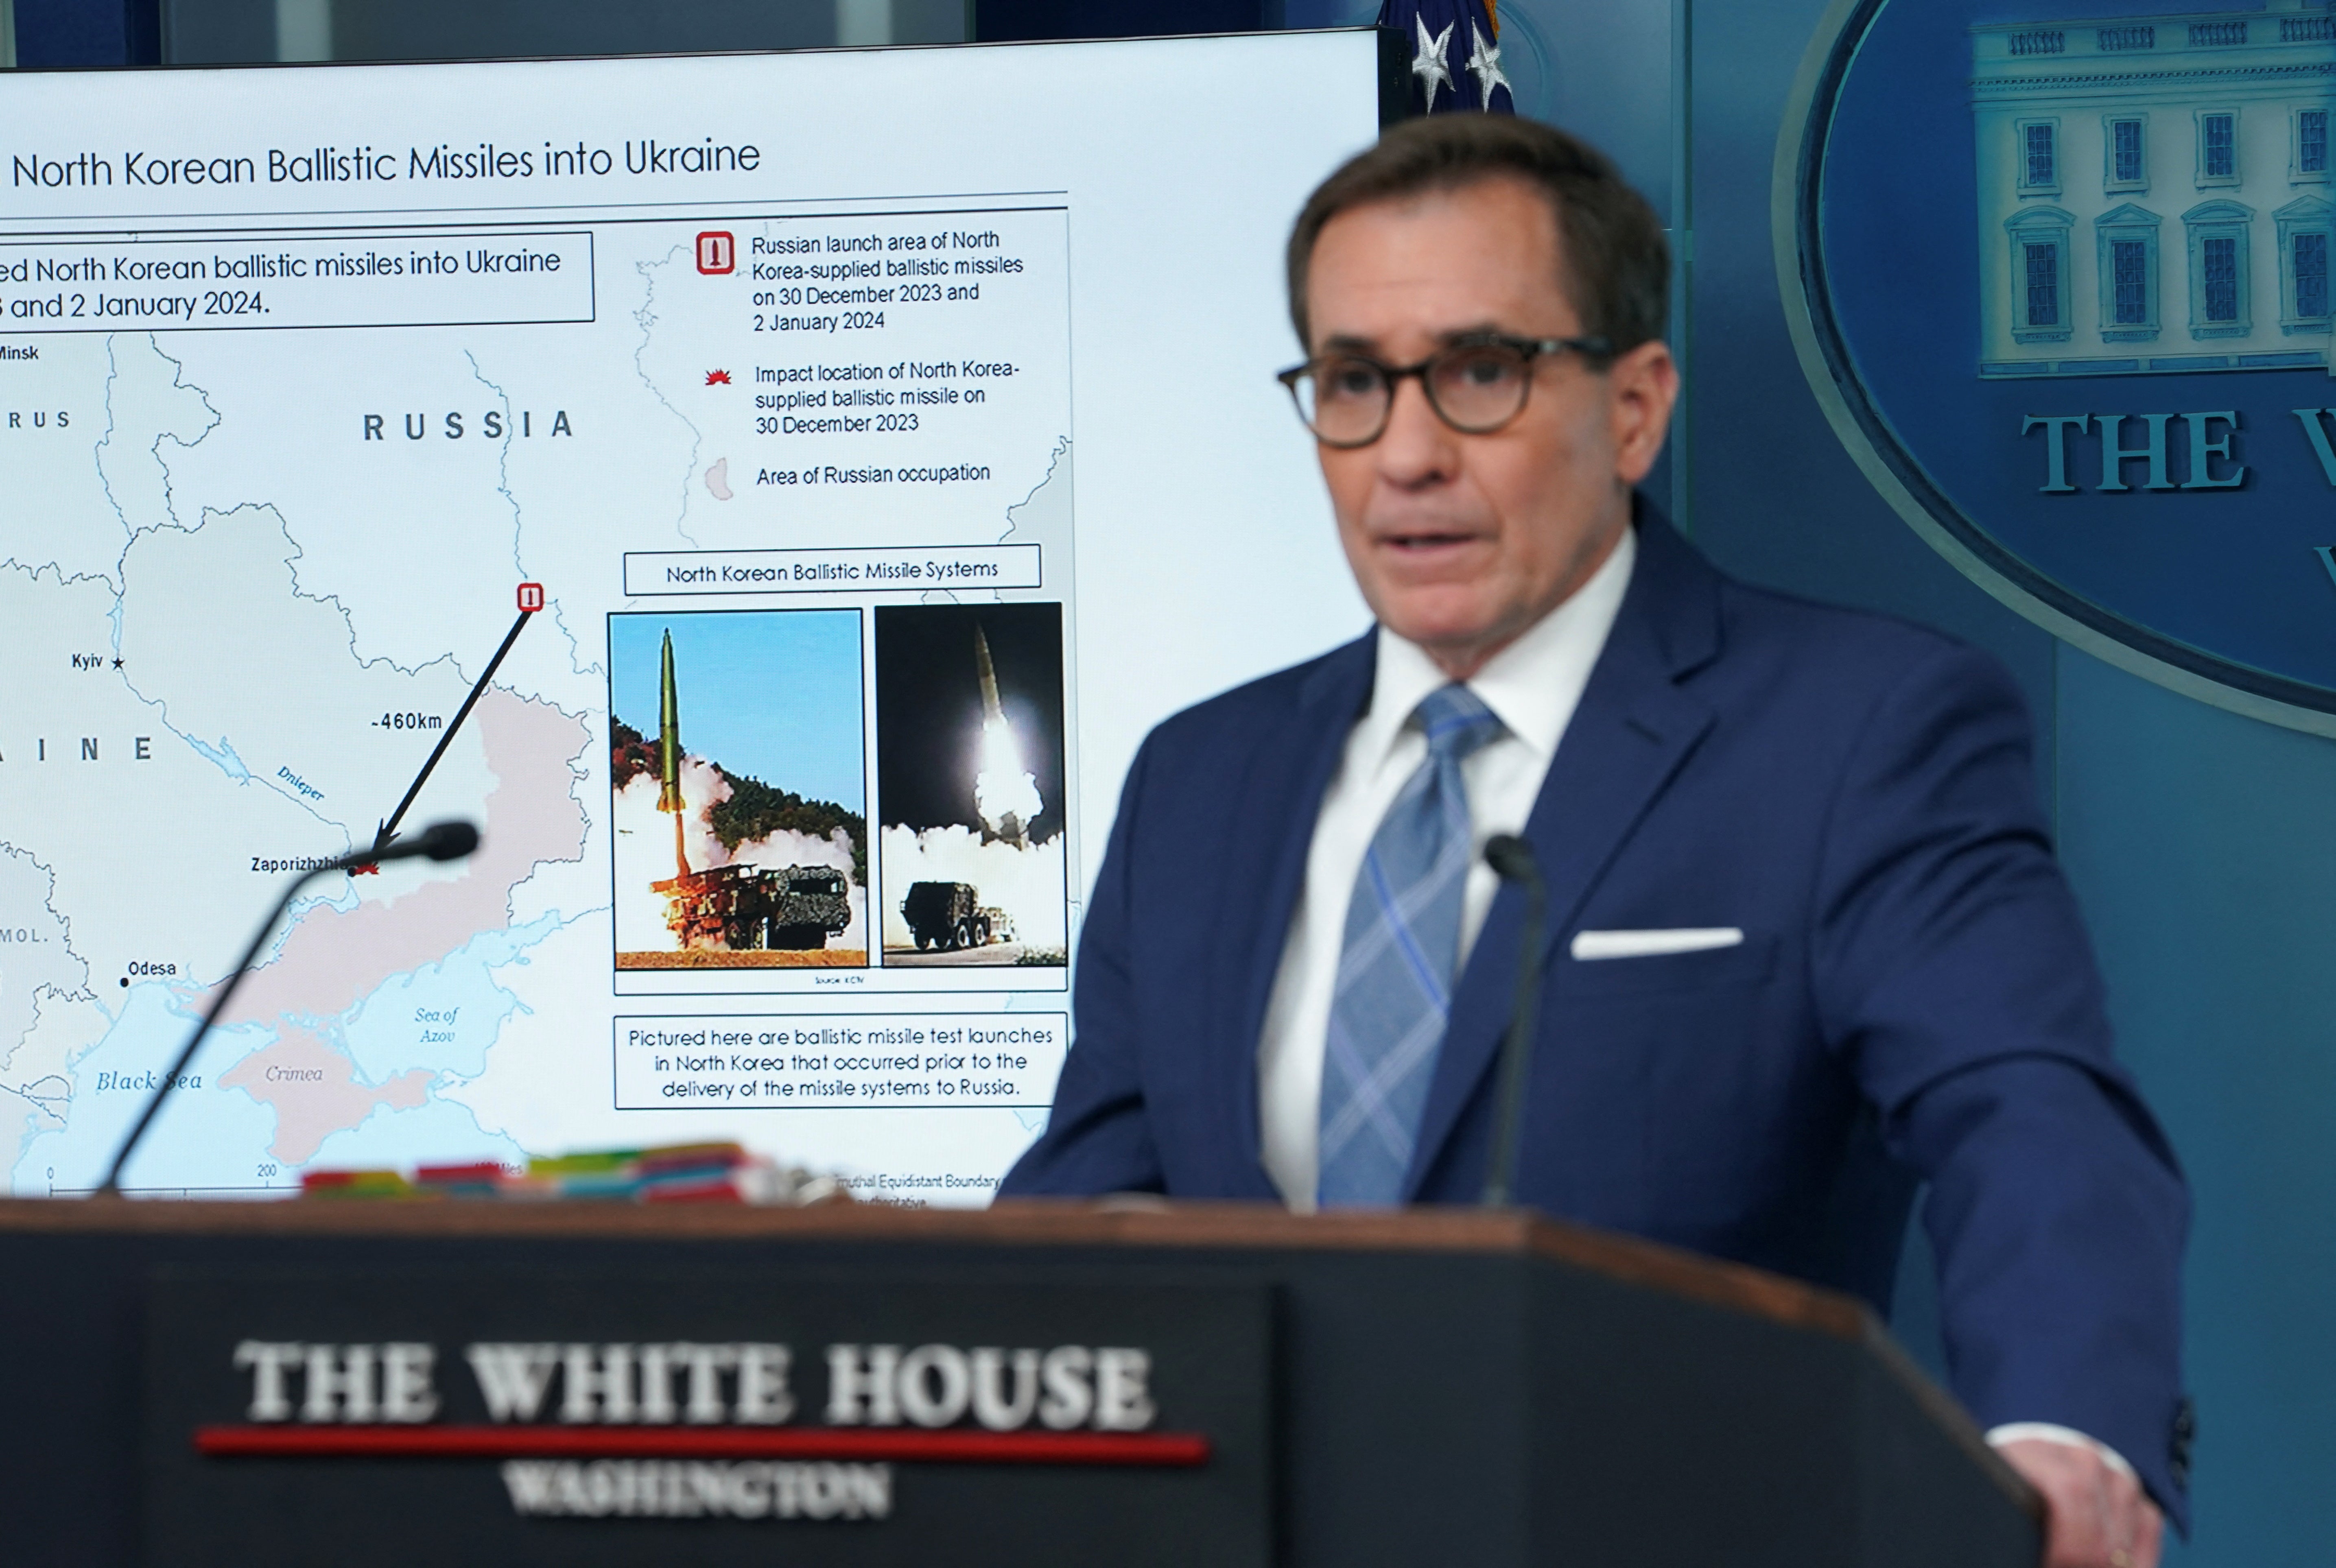 White House national security spokesperson John Kirby speaks about alleged North Korean ballistic missiles fired by Russia into Ukraine during a press briefing at the White House in Washington, U.S., January 4, 2024